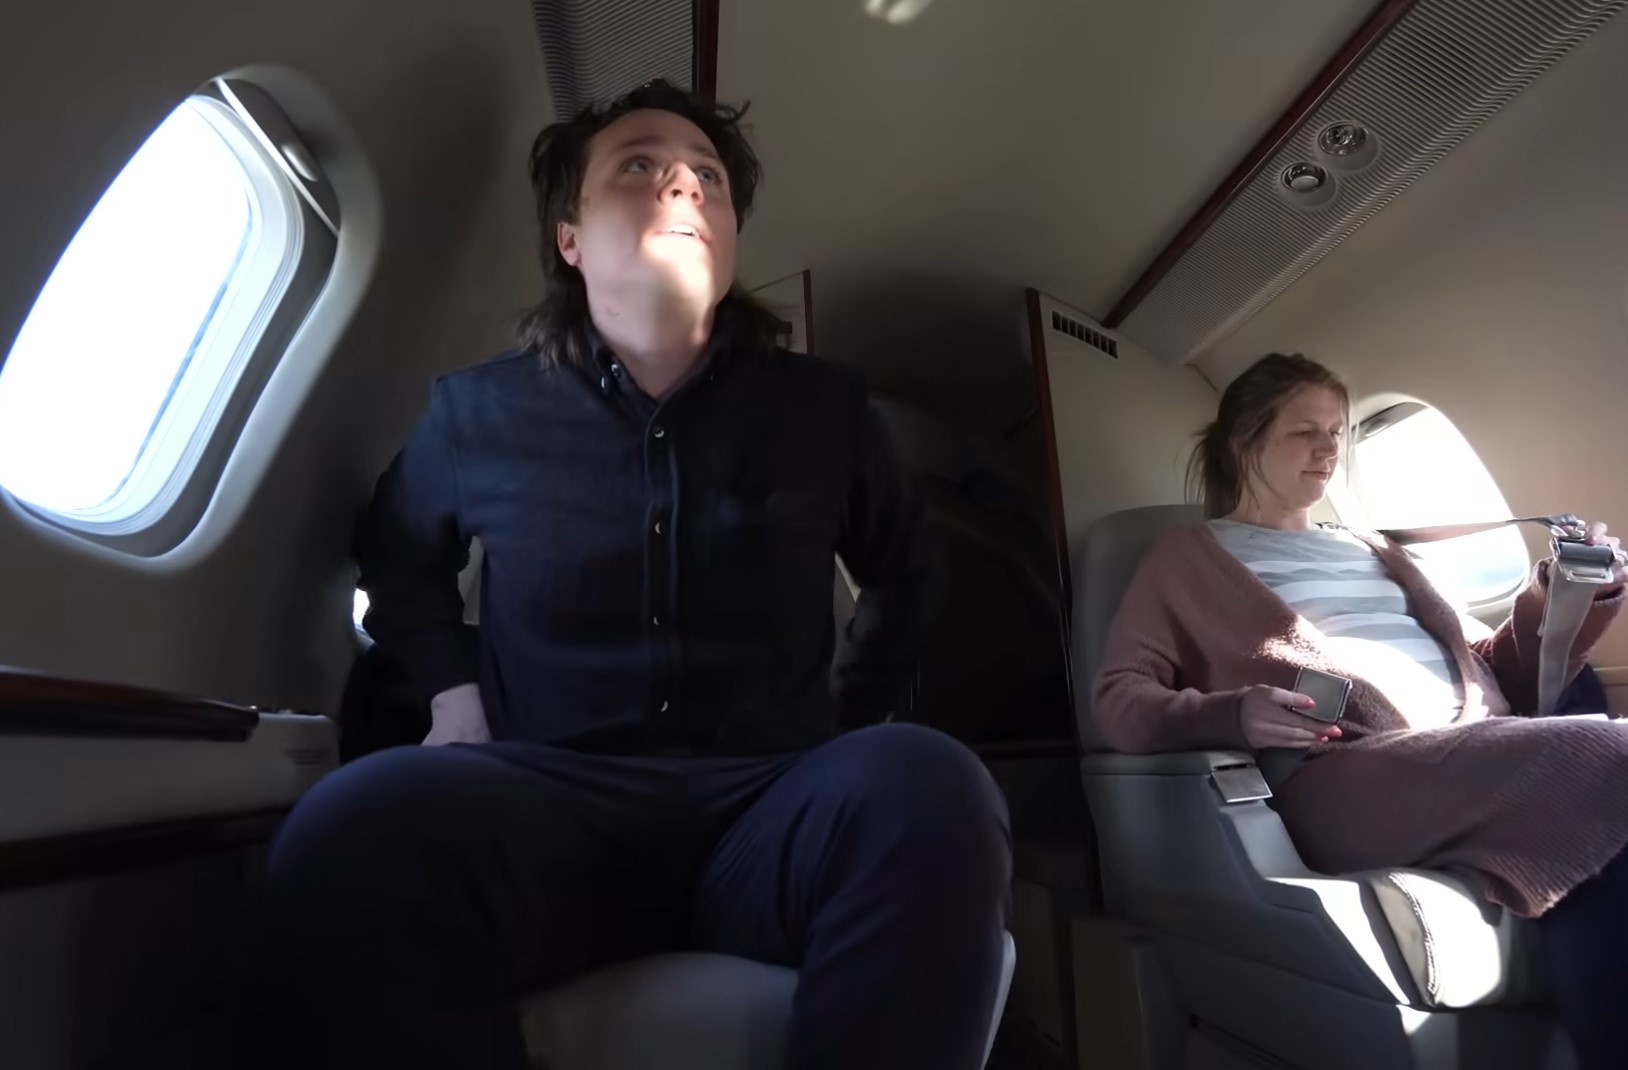 YouTuber stuns people by using 'Uber' private jet service worth over $500 6